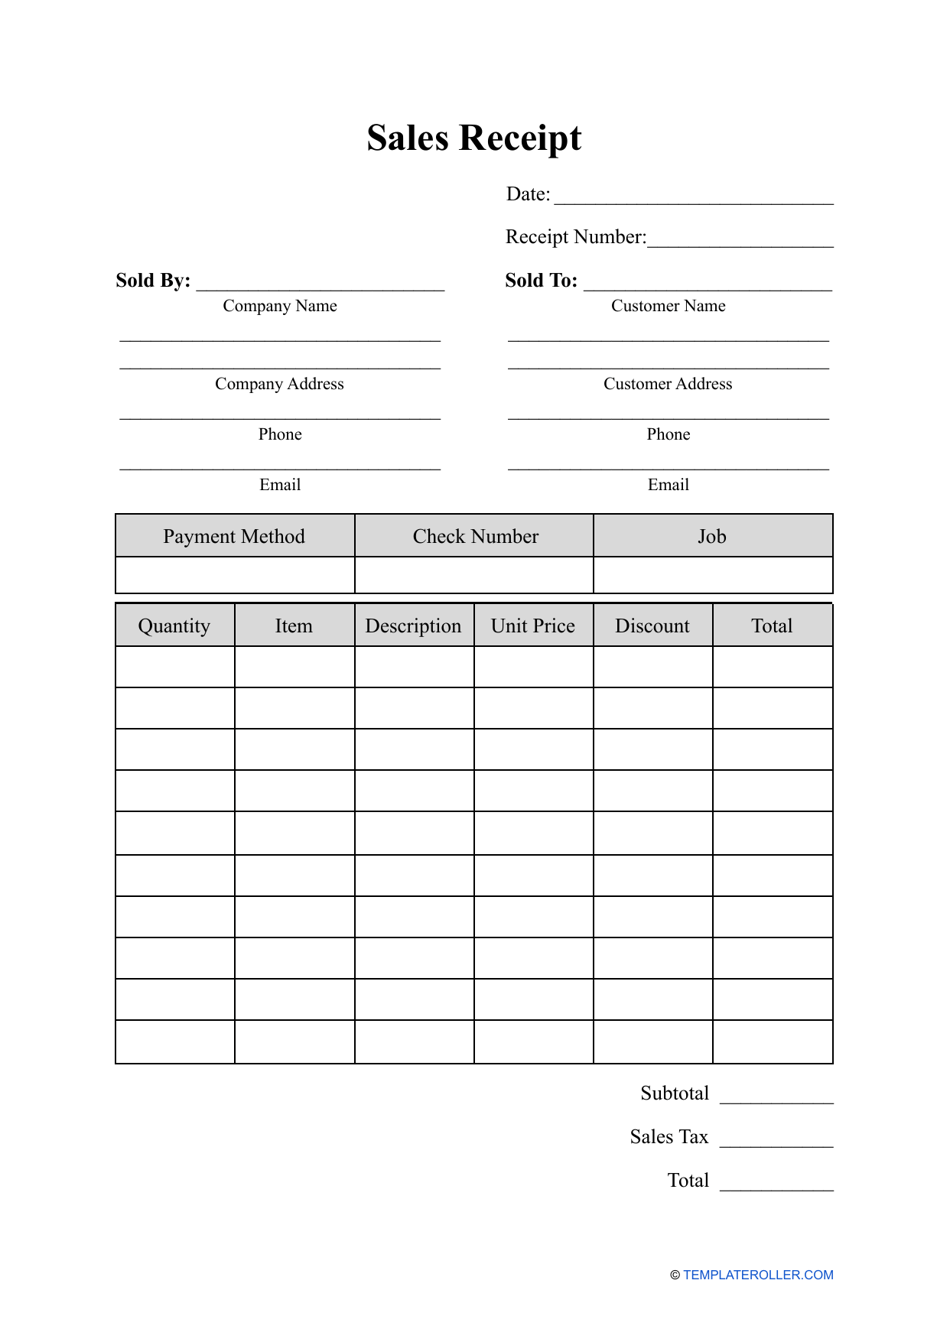 sales-receipt-template-fill-out-sign-online-and-download-pdf